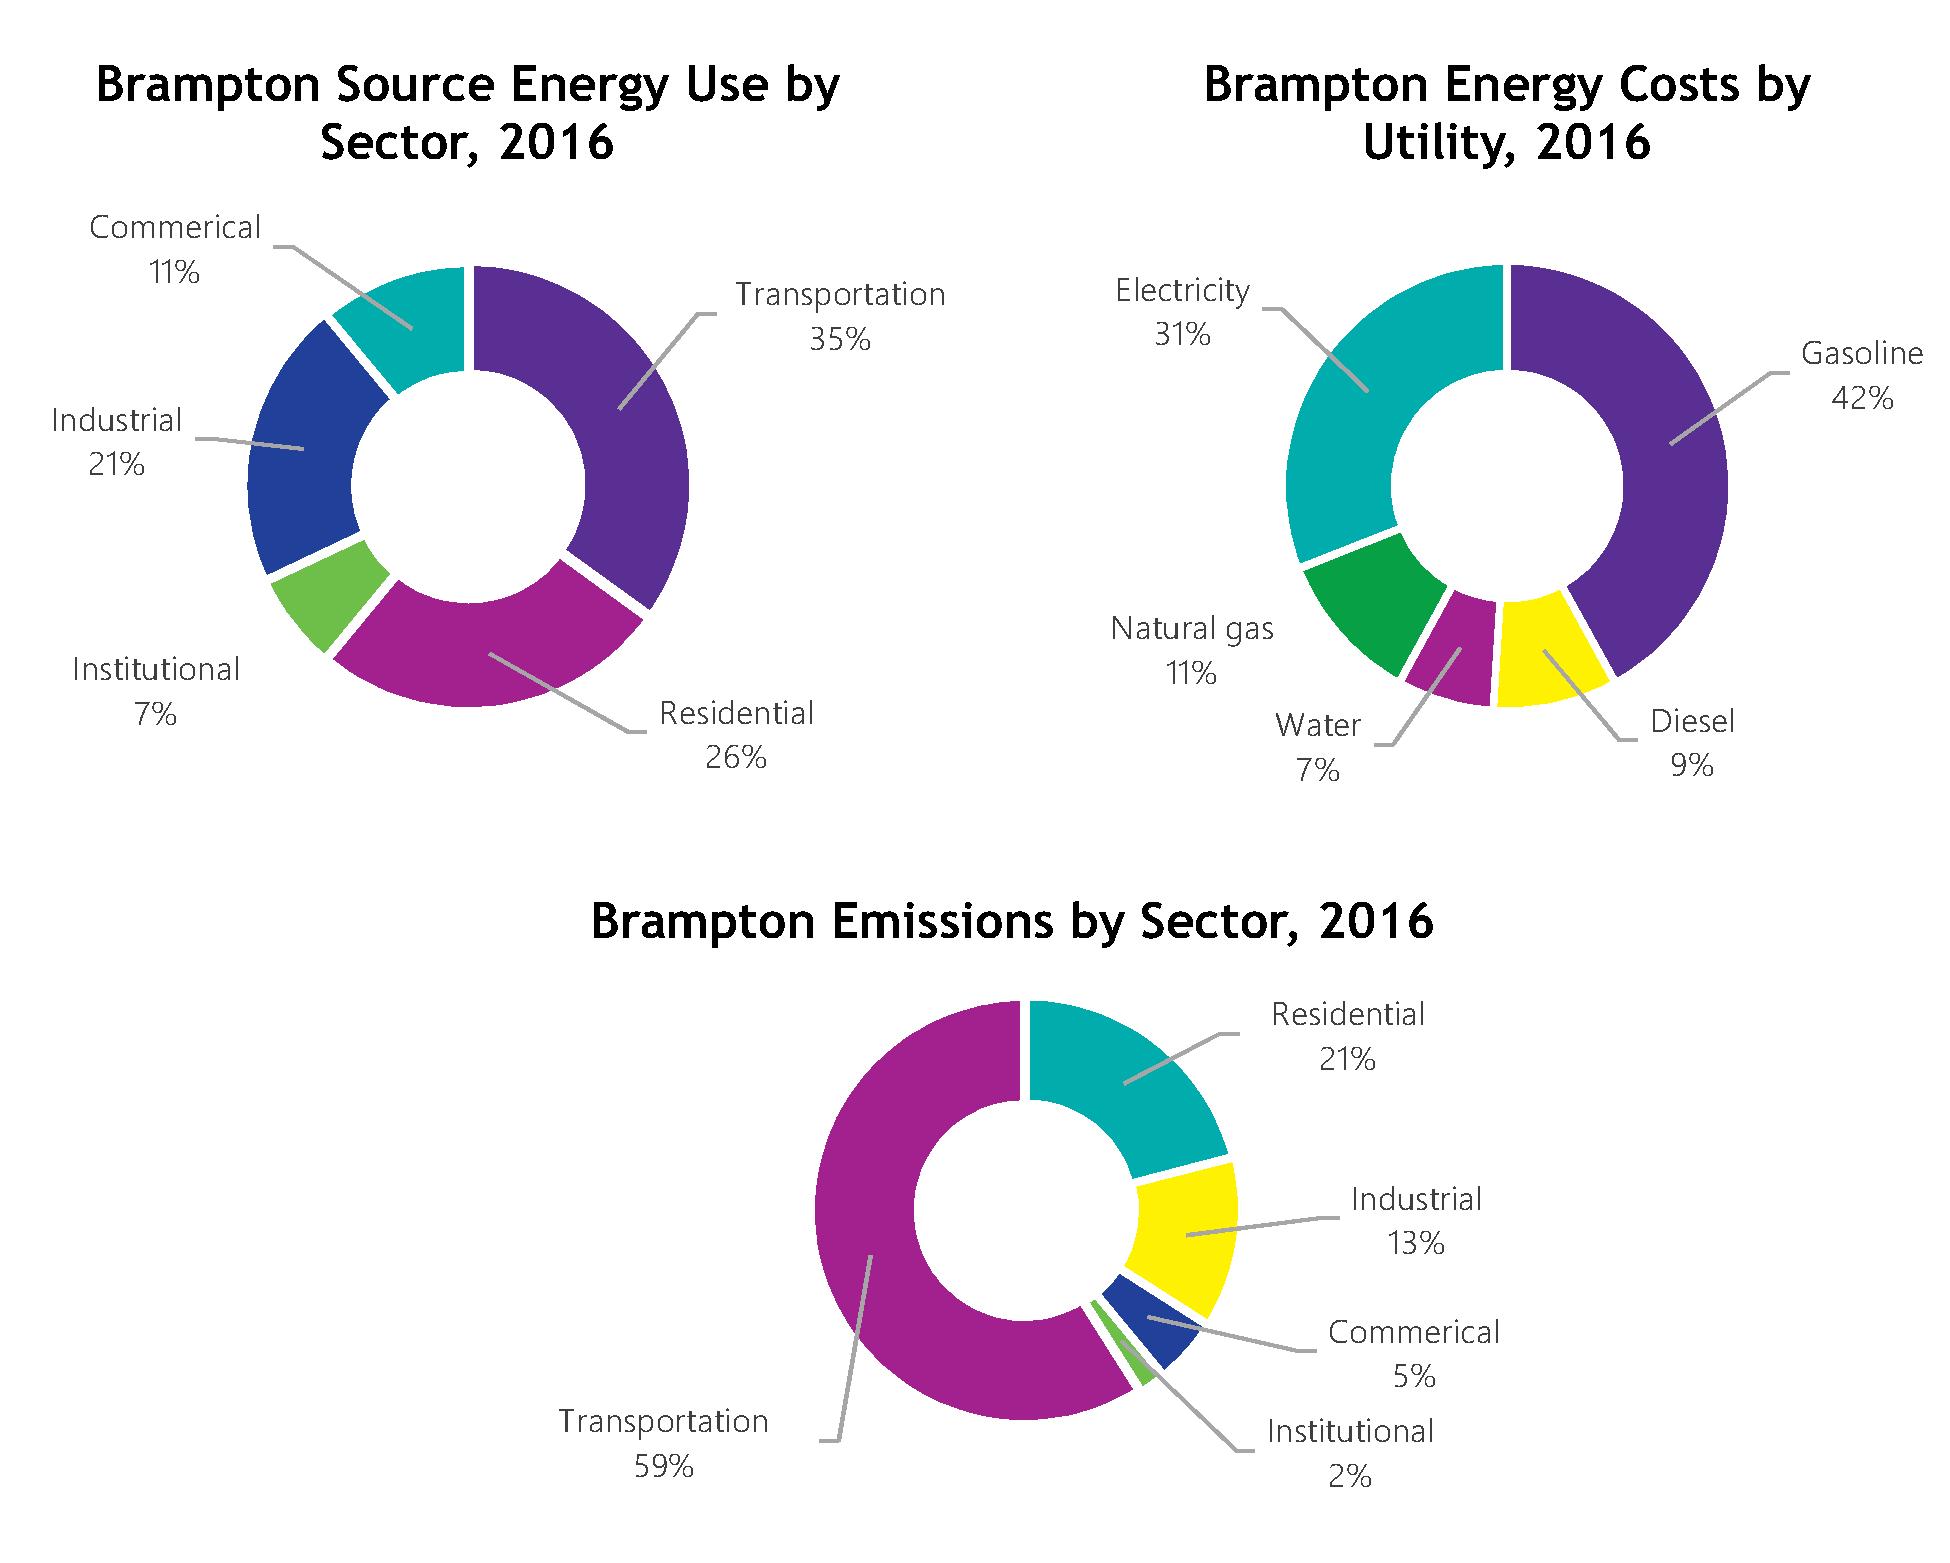 These graphics illustrate the division of Brampton energy use, energy costs, and emissions by sector published in the CEERP.